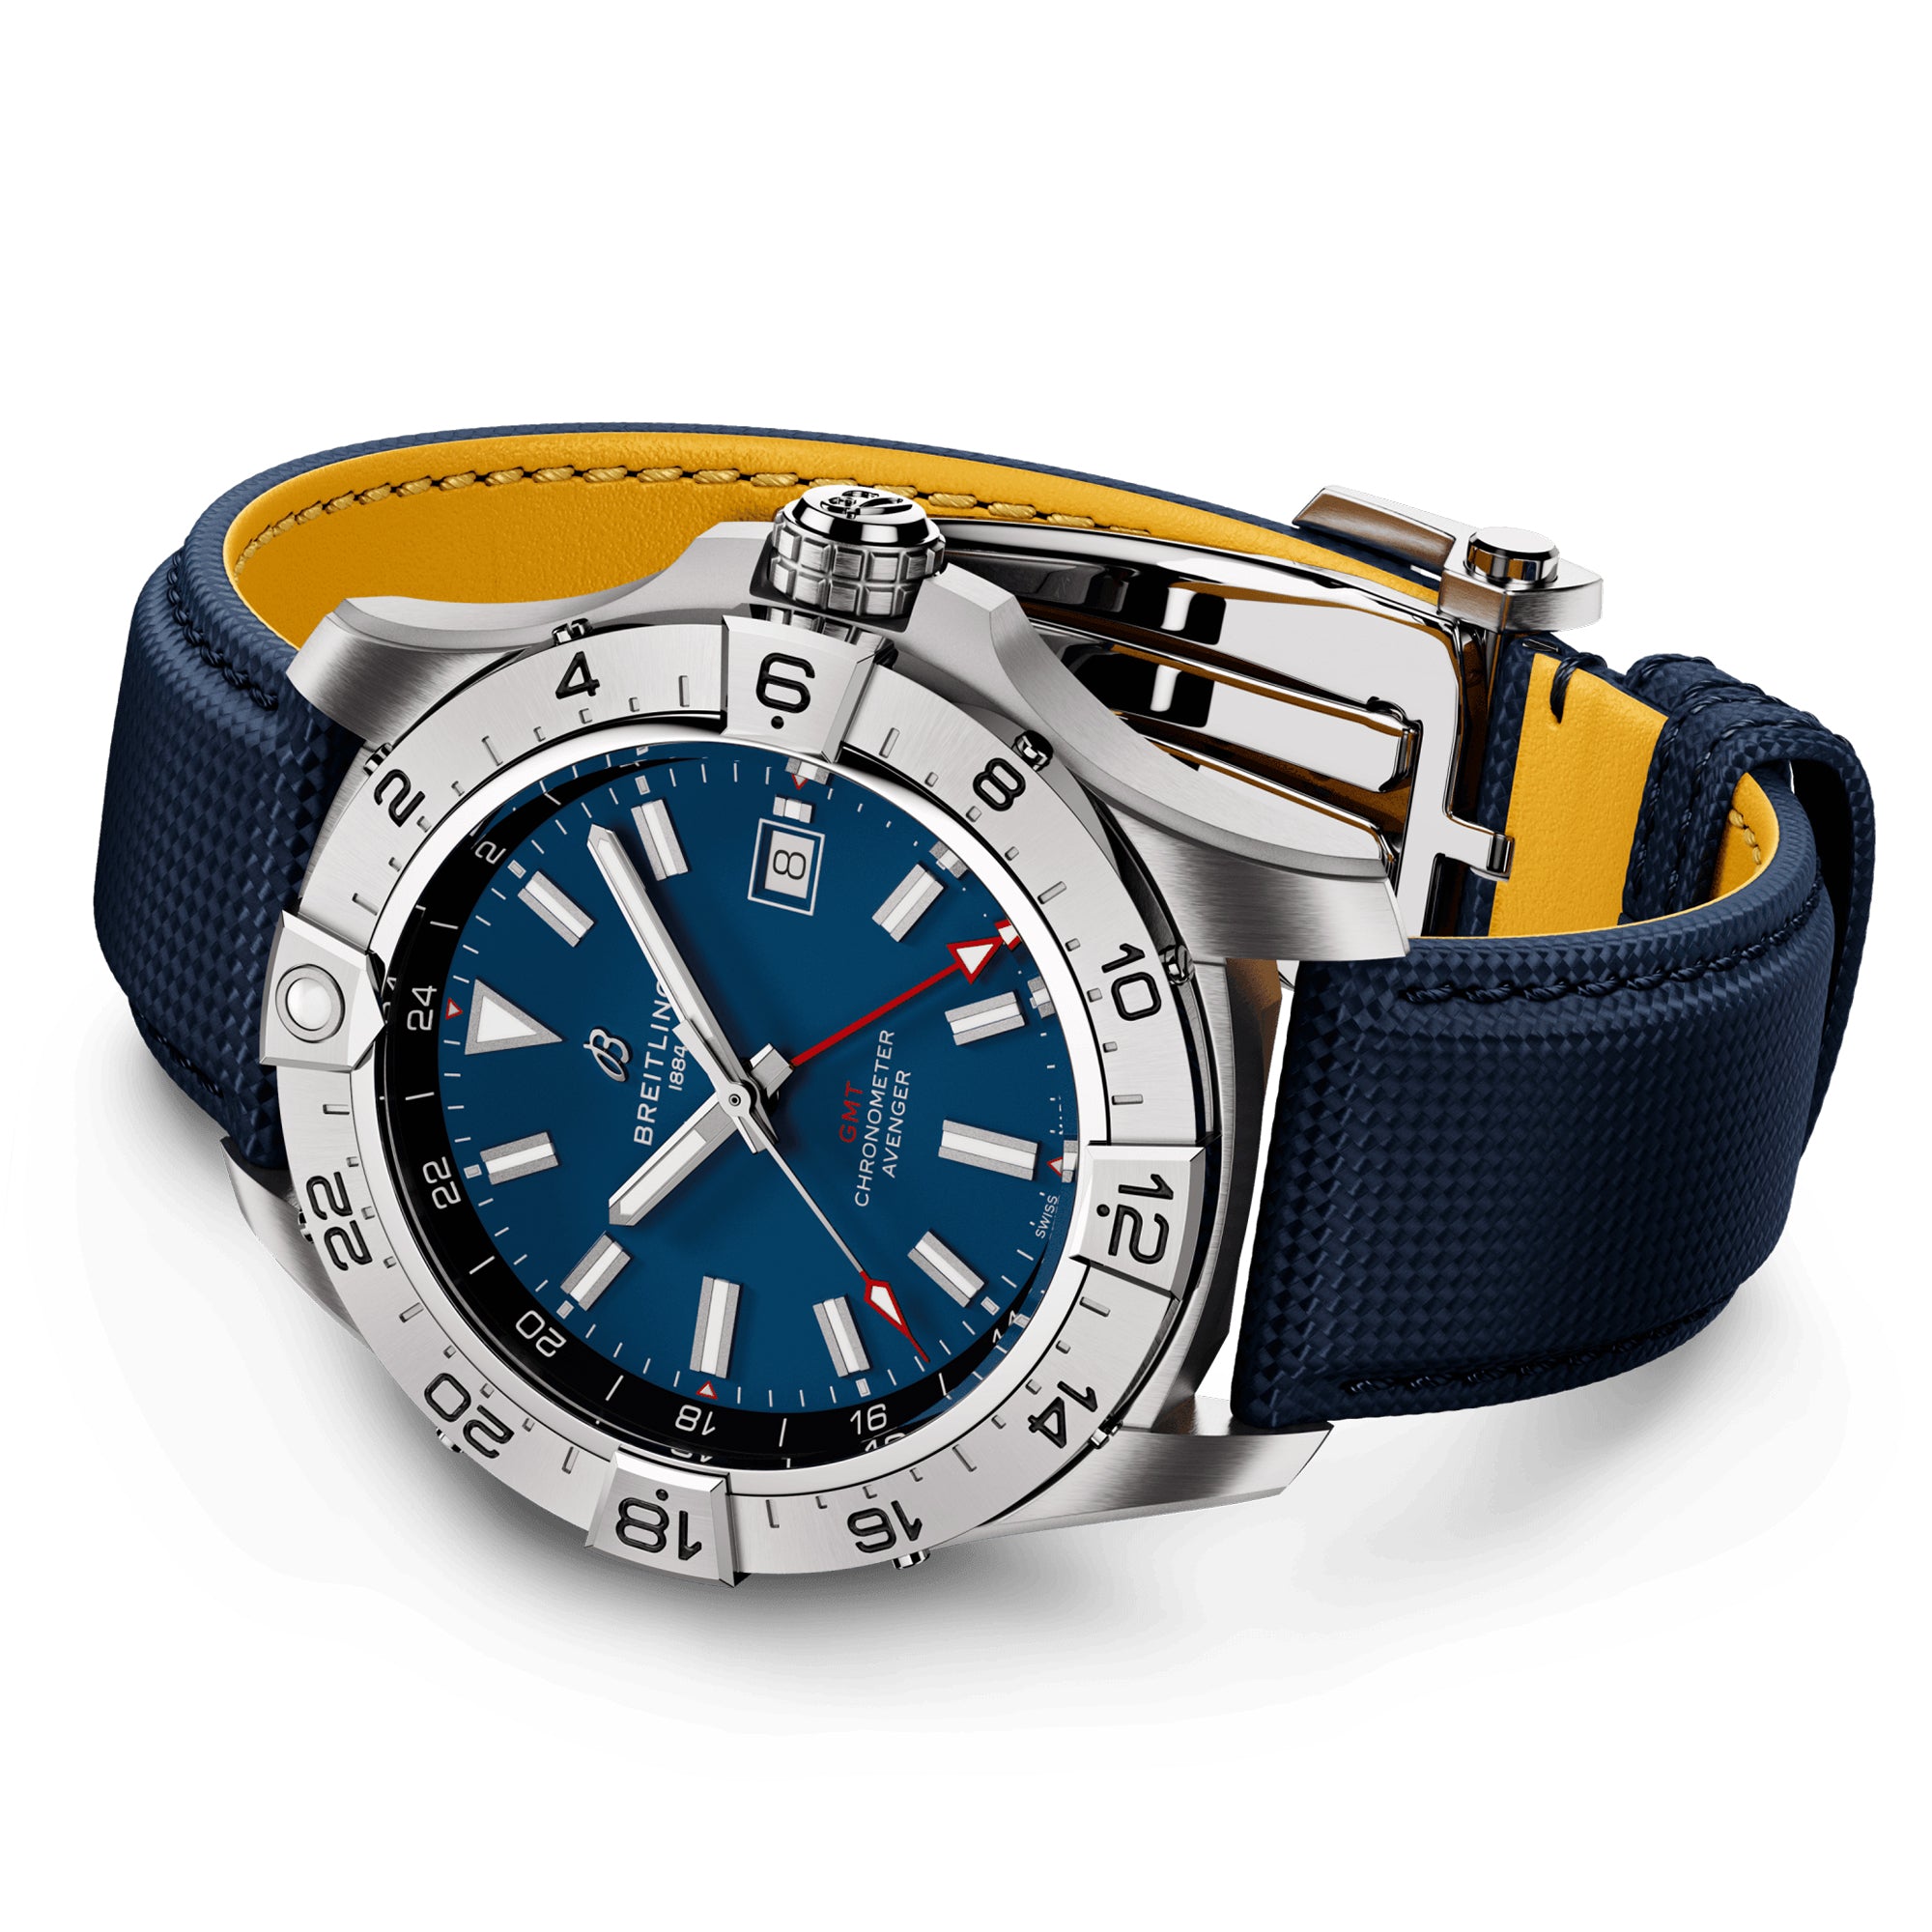 Avenger GMT 44mm Blue Dial Automatic Strap Watch